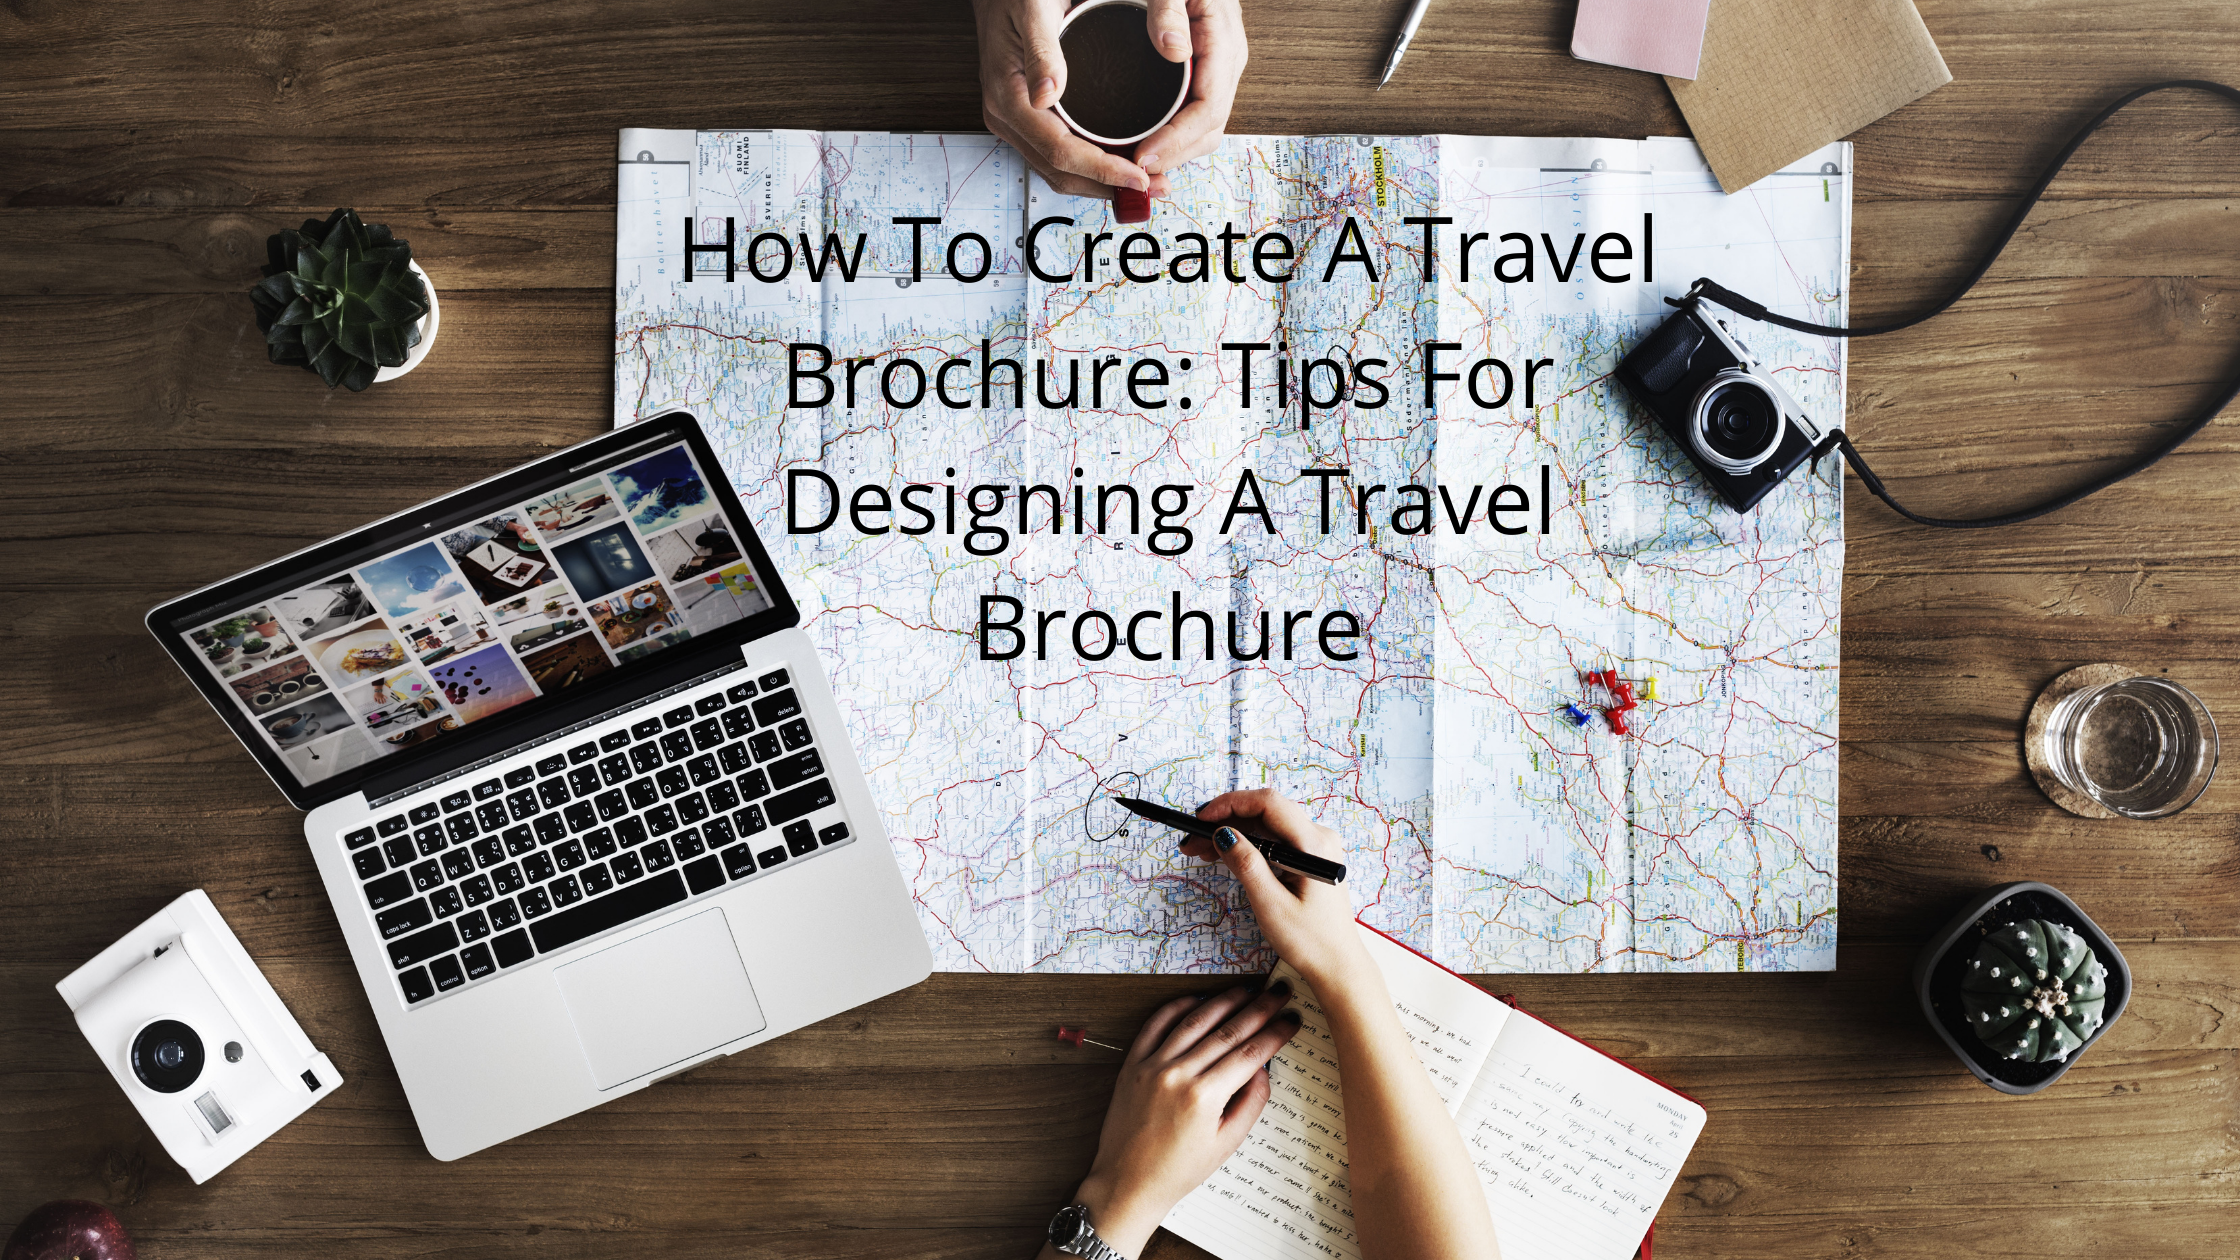 How To Create A Travel Brochure: Tips For Designing A Travel Brochure